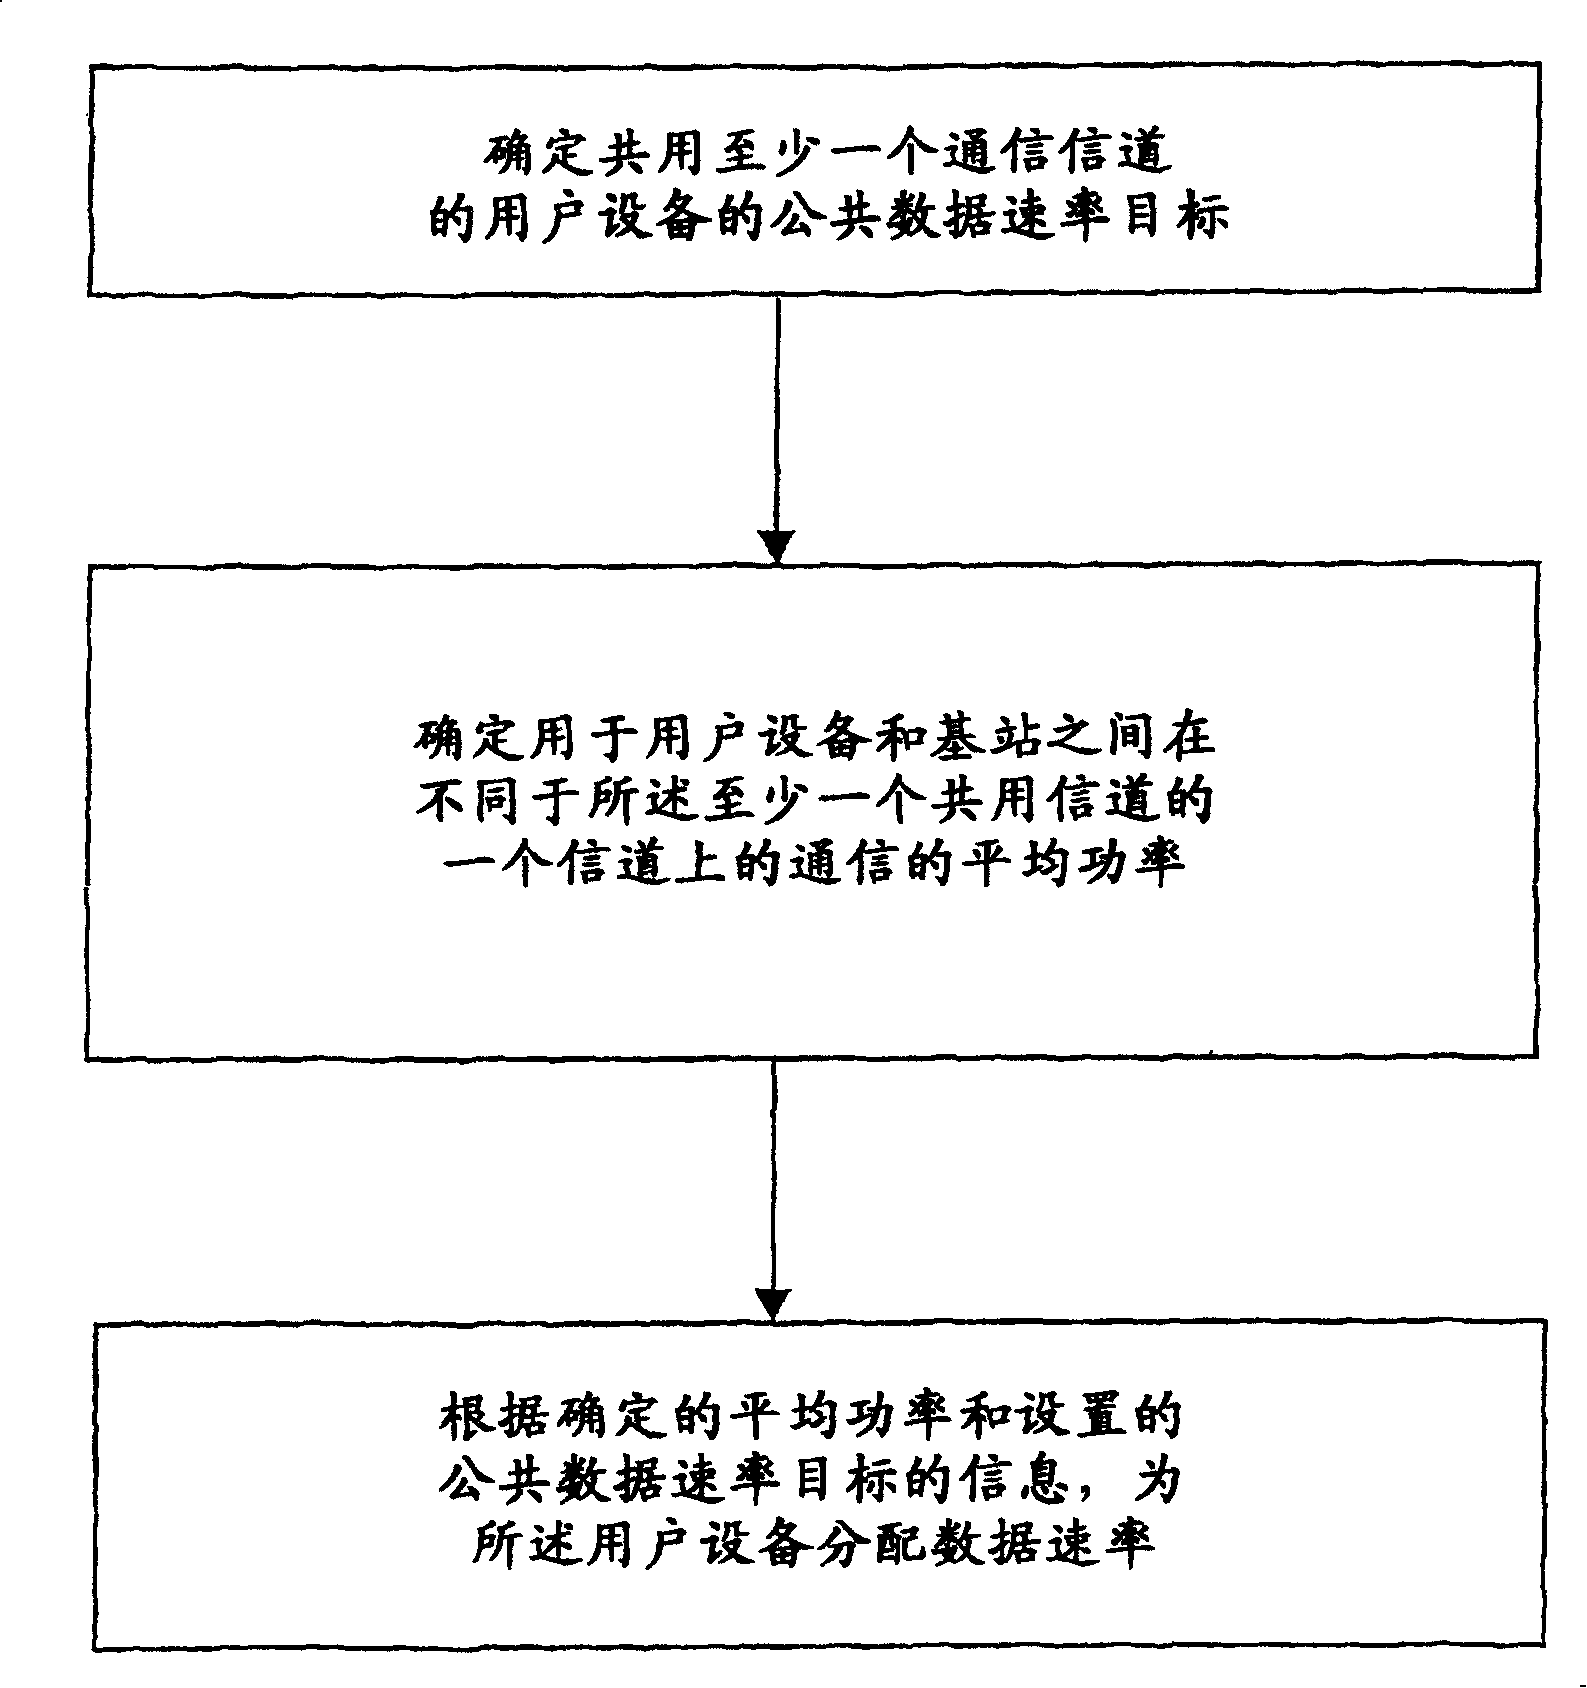 Allocation of shared channel data rates in a communication system